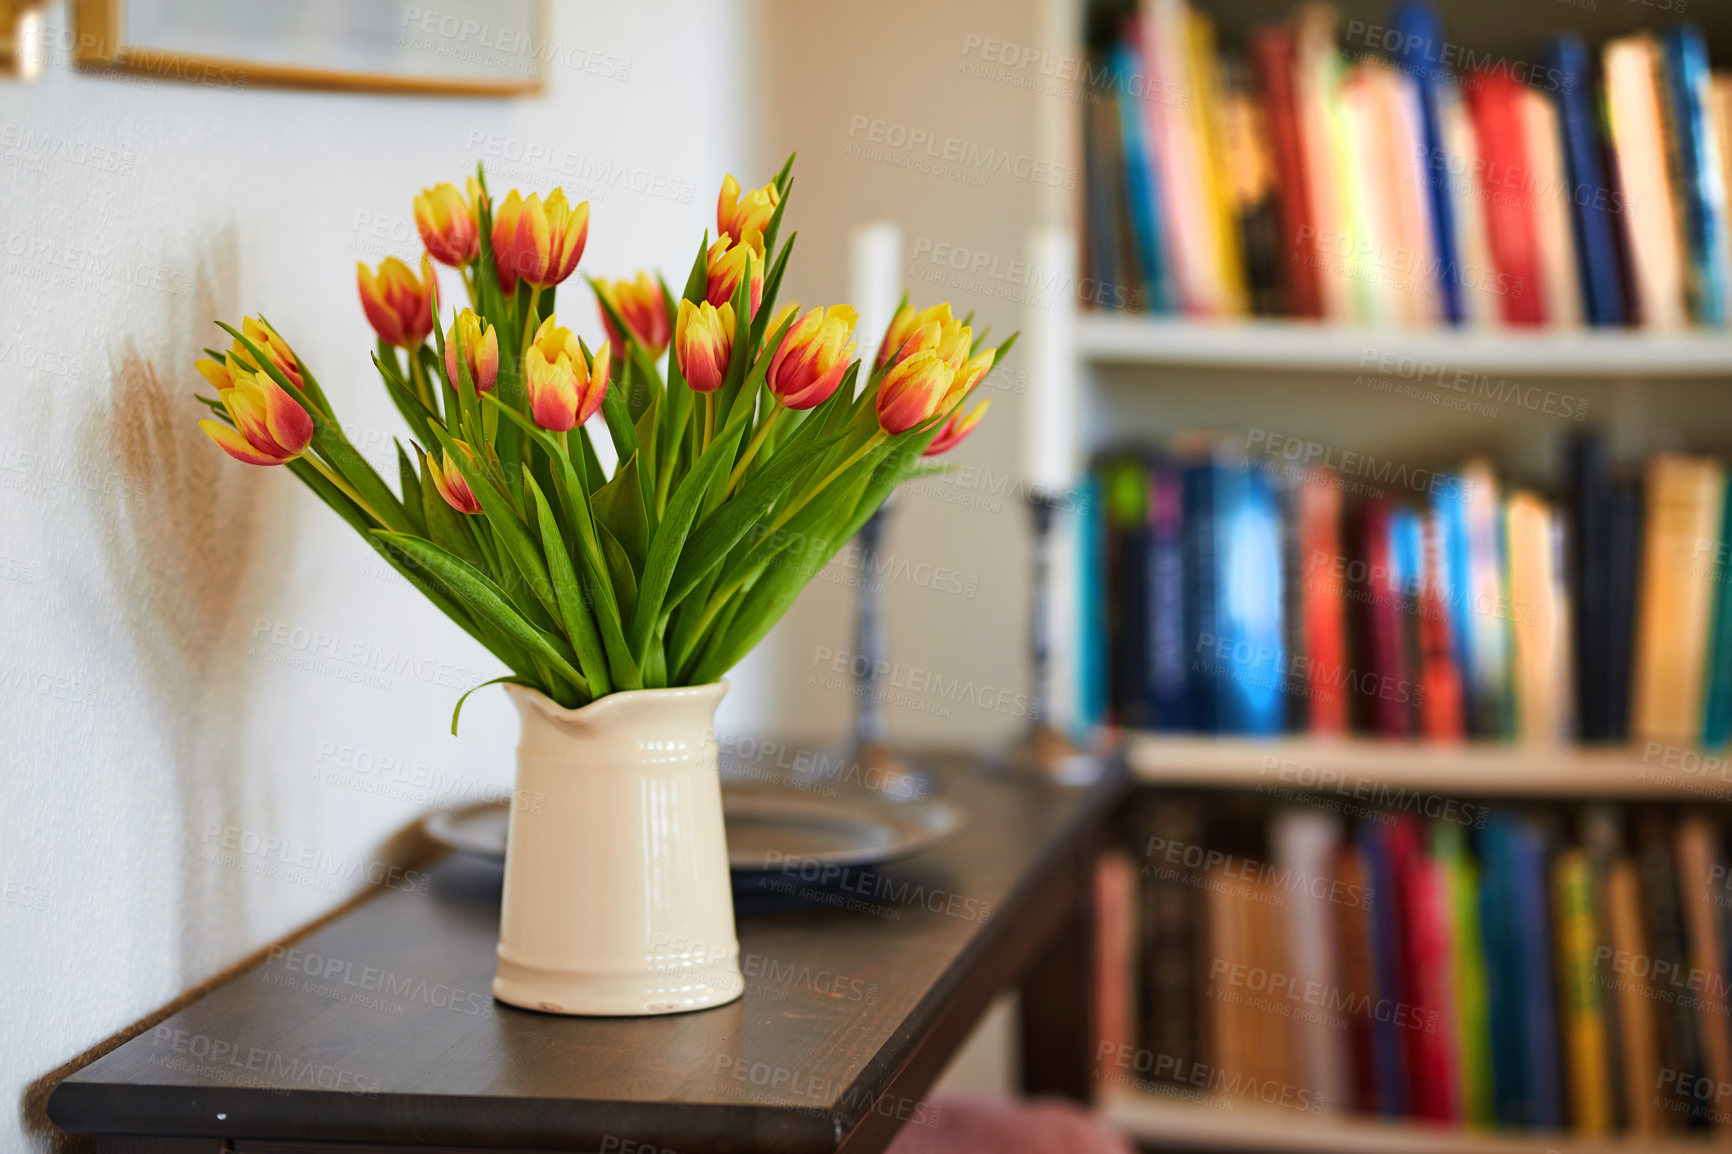 Buy stock photo Beautiful bouquet of tulips on a living room table. Pretty flowers in a vase for house decoration. Red and yellow tulip flowering plants with green stem used as home ornaments to brighten up a room